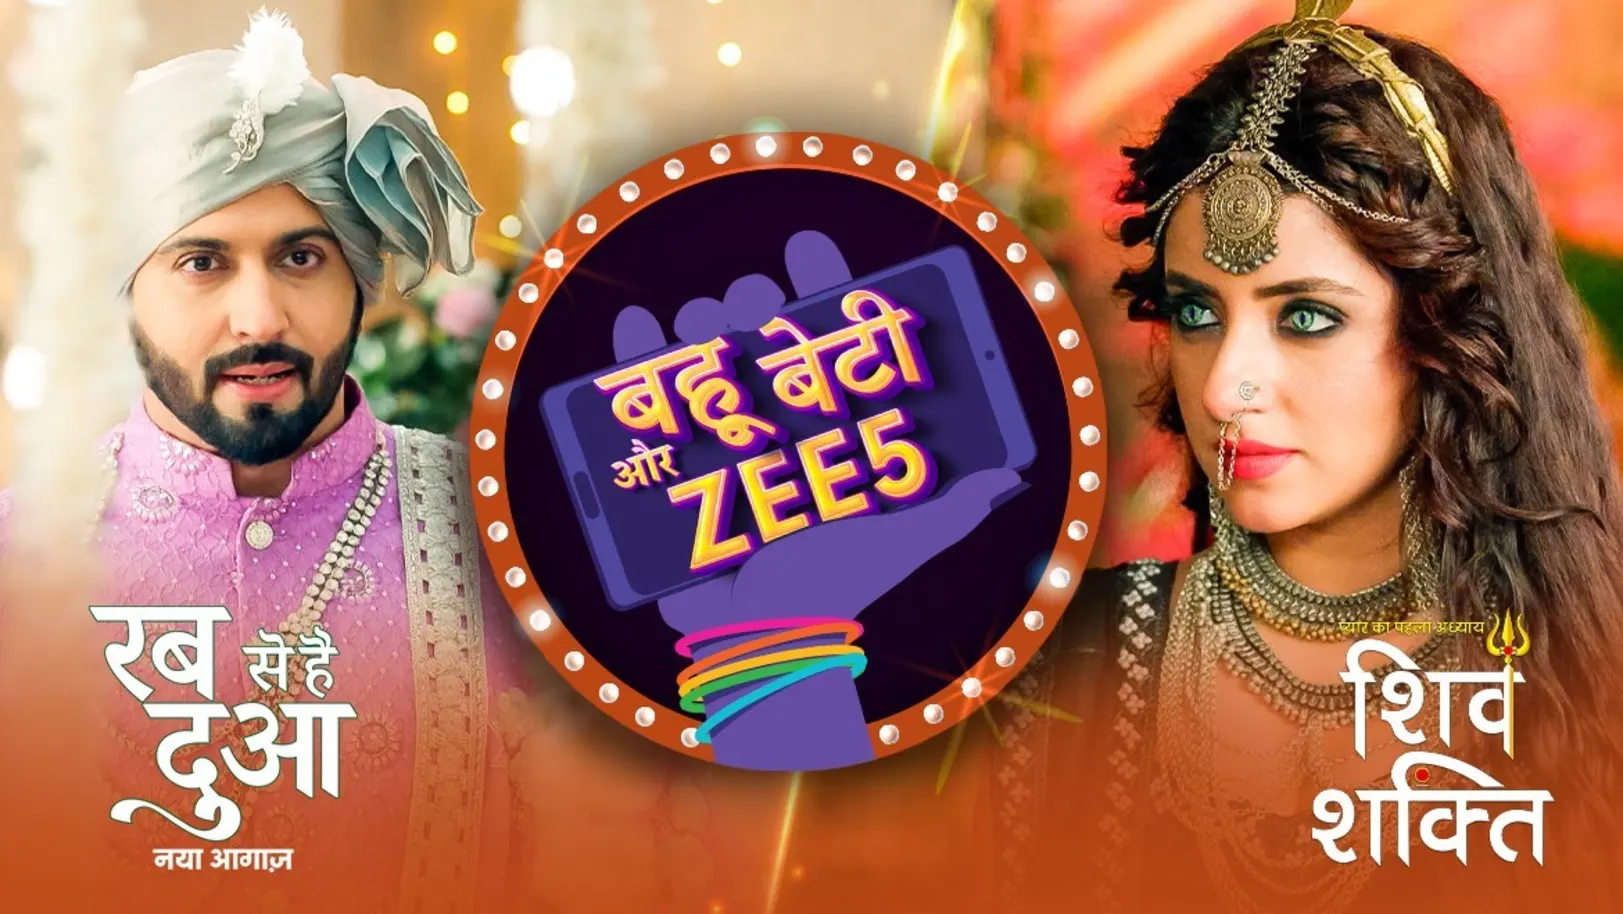 Time Changes the Dynamics of Relationships | Bahu Beti Aur ZEE5 Episode 24